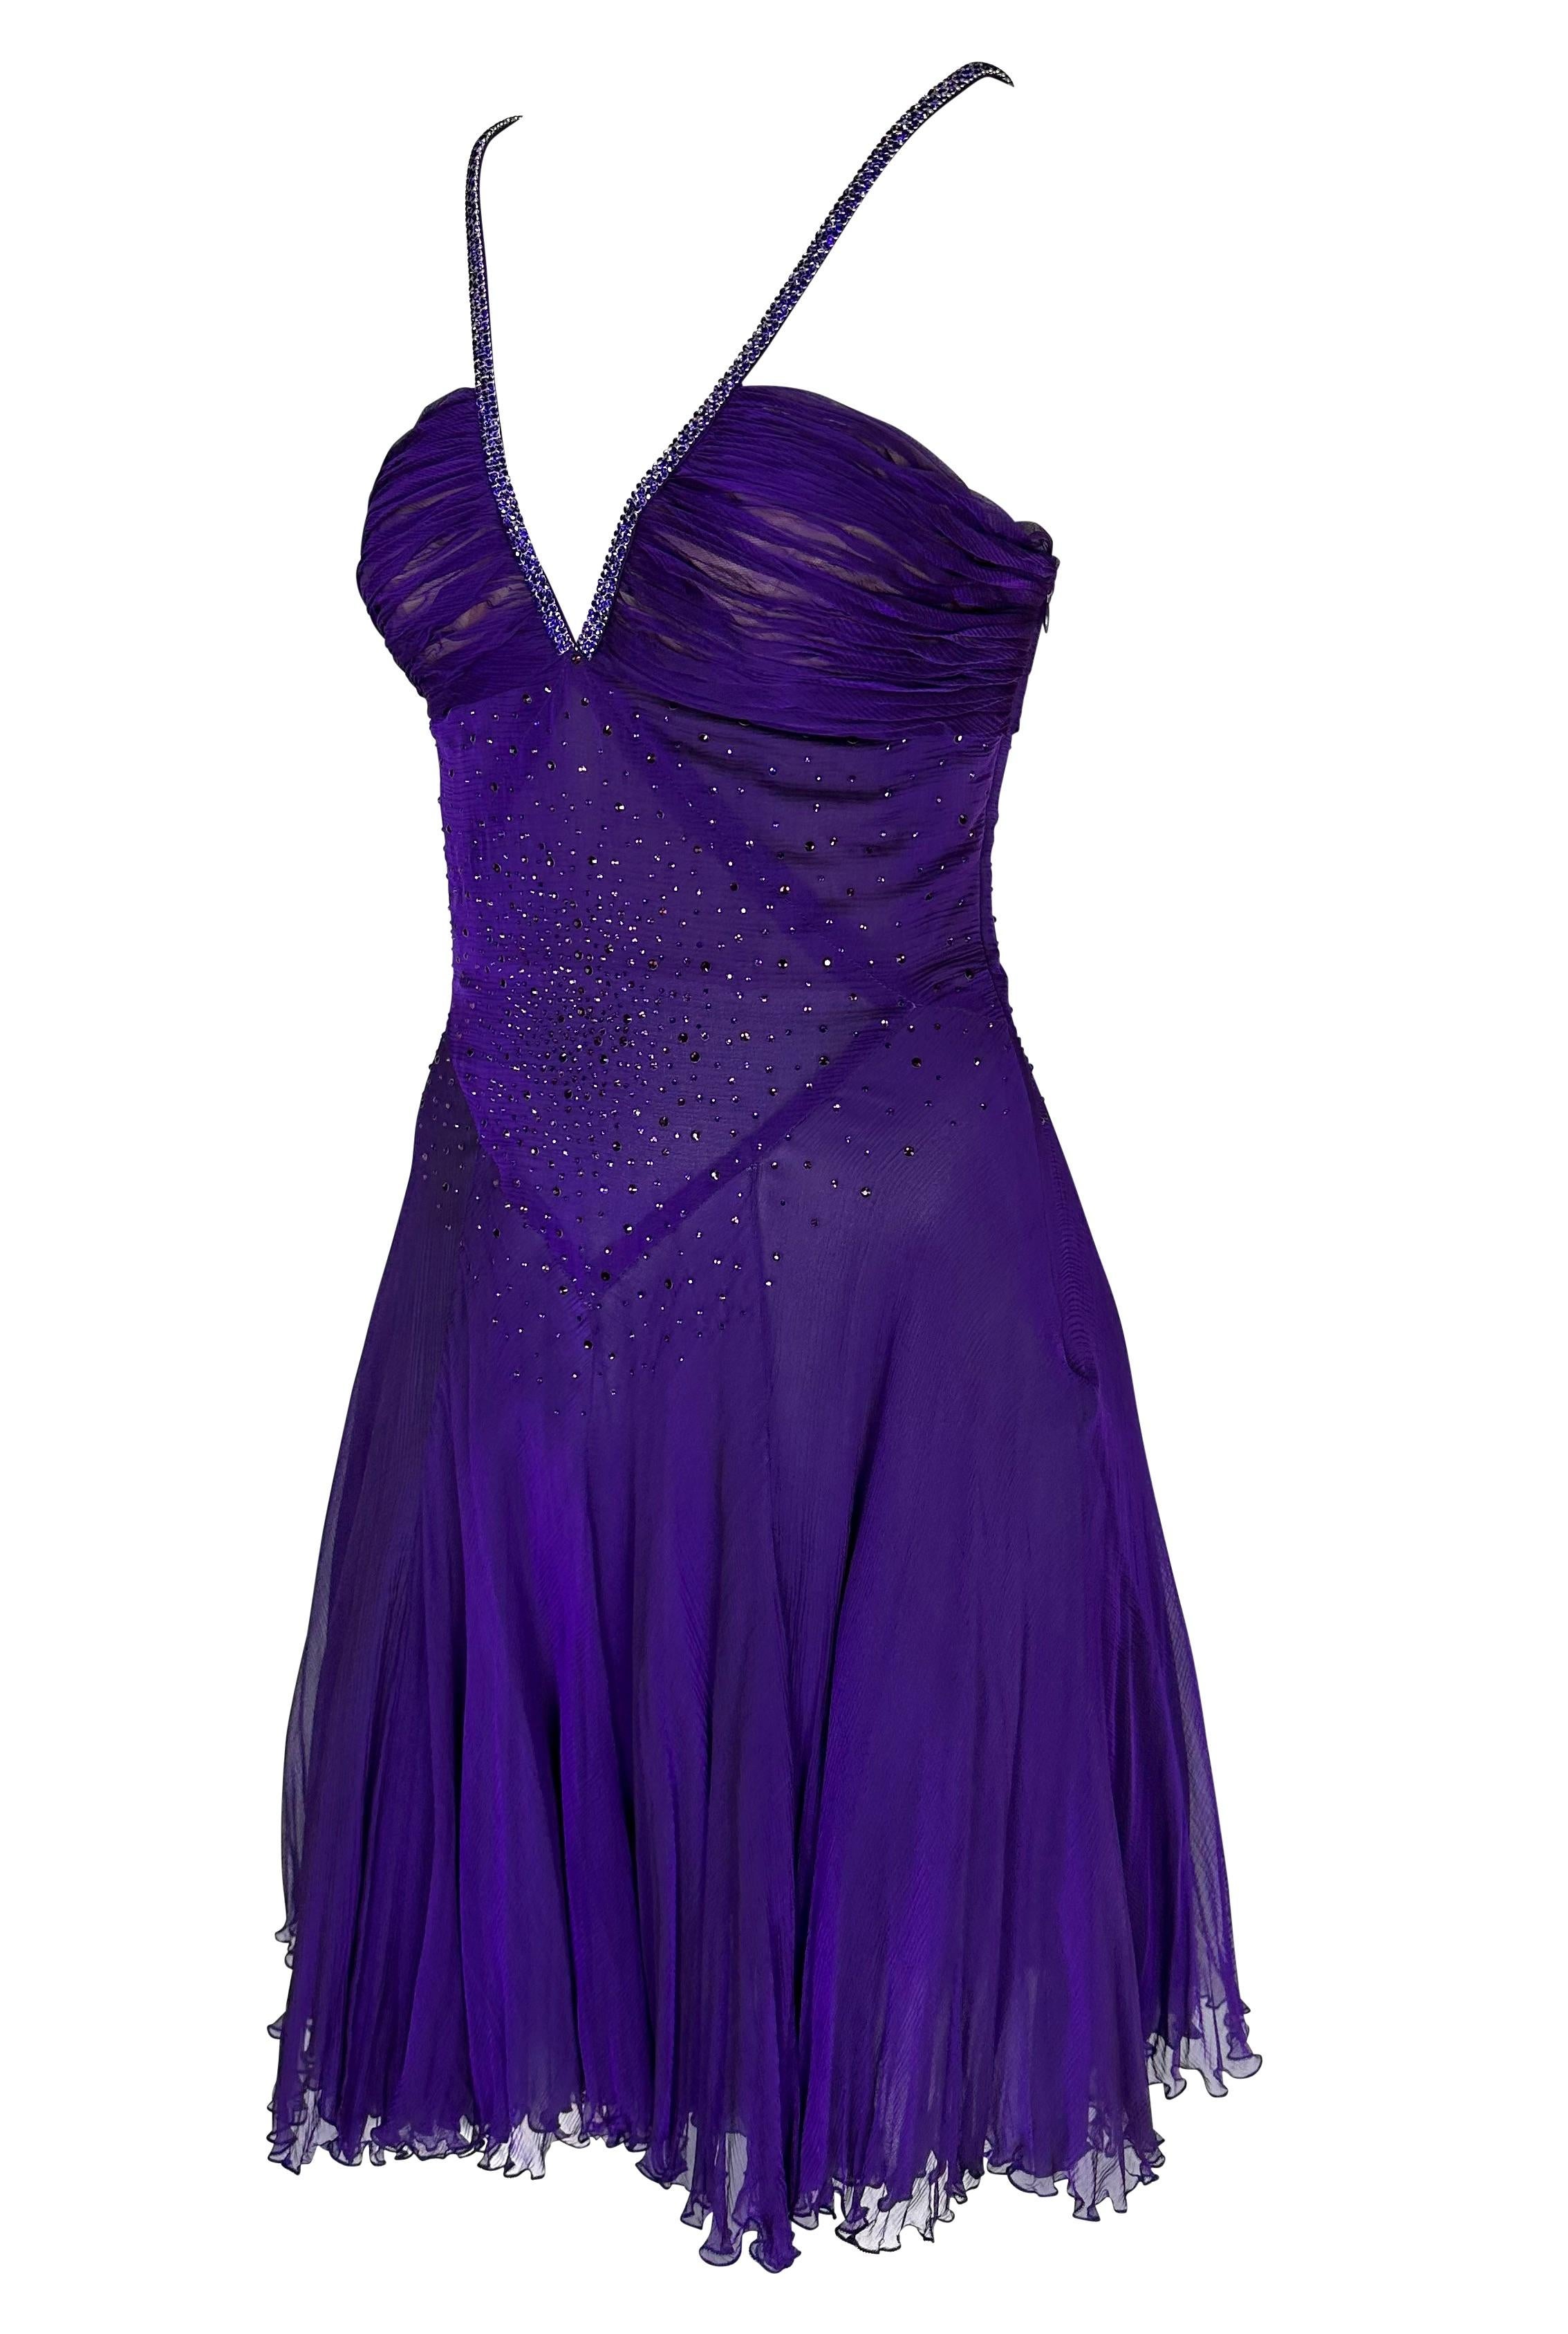 Presenting a beautiful deep iridescent purple Versace dress, designed by Donatella Versace. From the late 2000s, this semi-sheer dress features a deep v-neckline, flared skirt, semi-exposed back, and crystal-covered straps. This fabulous dress is